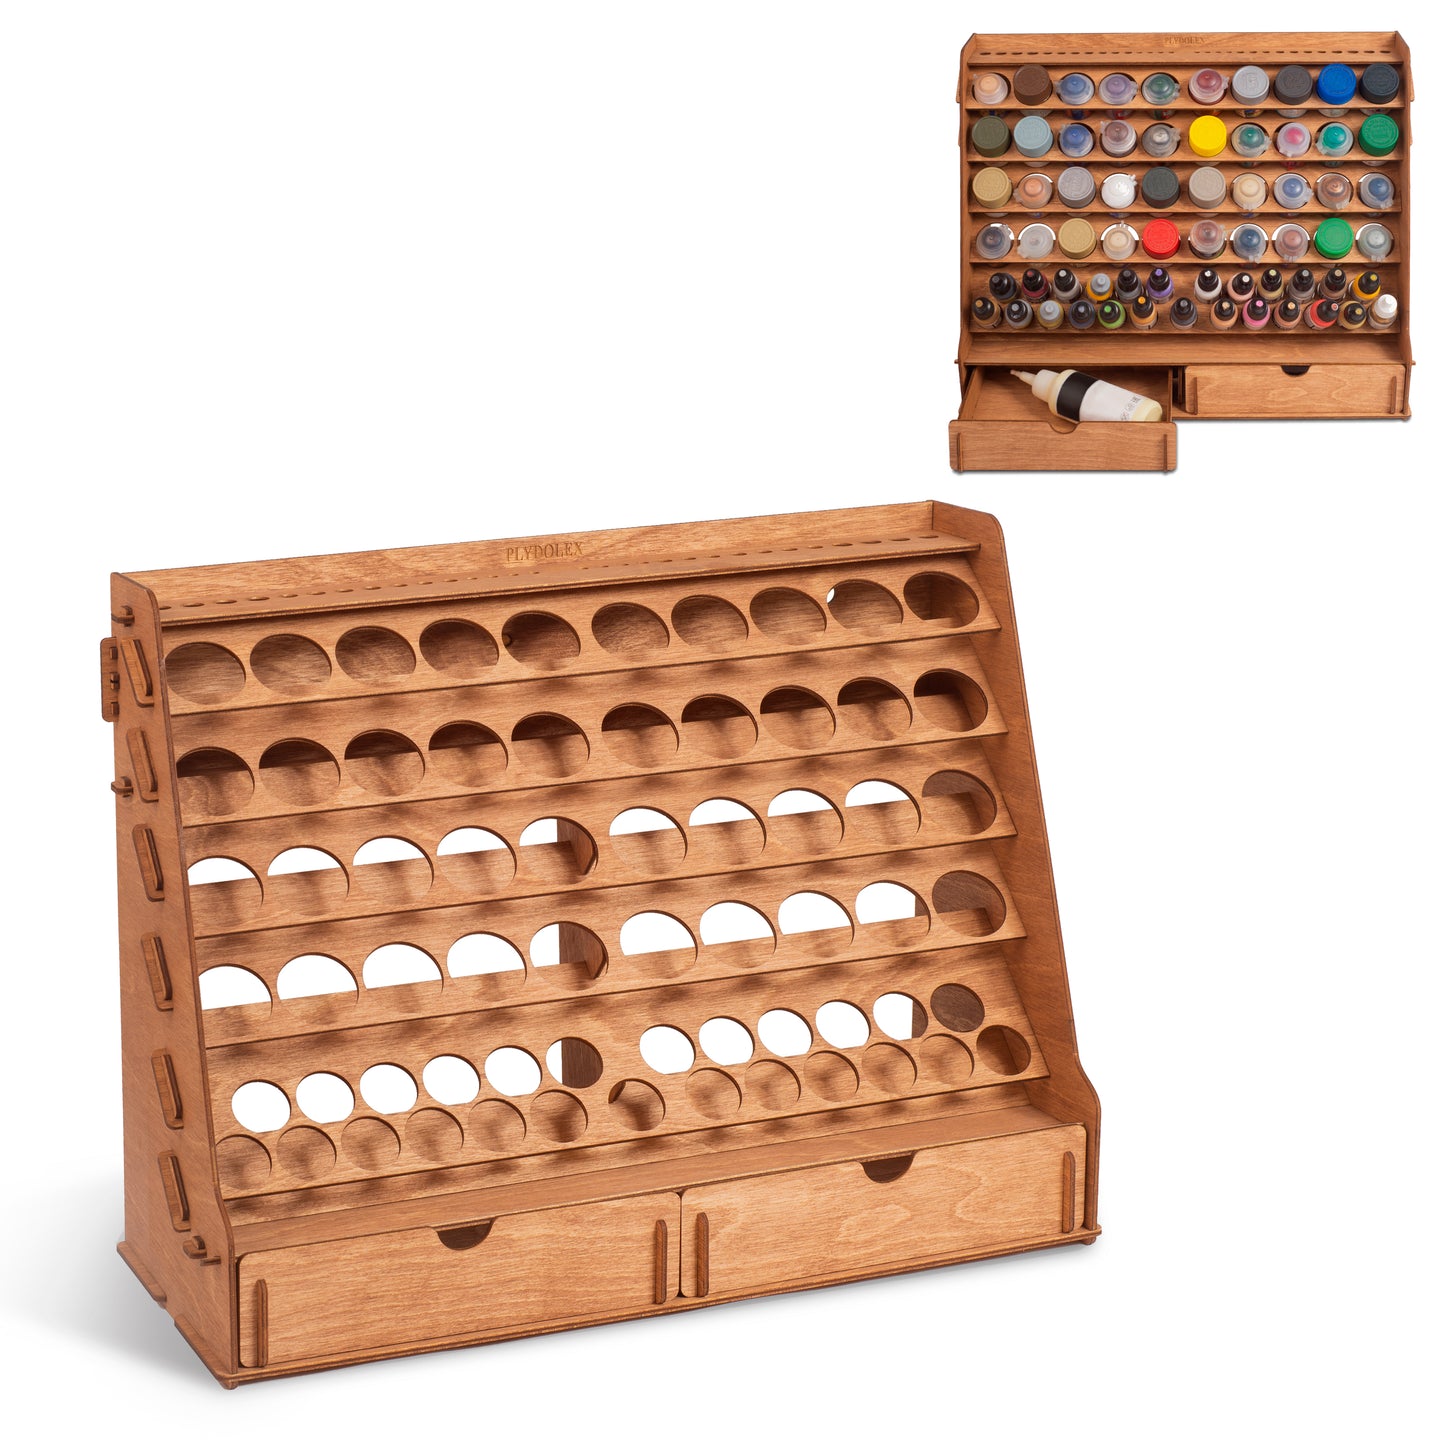  Plydolex Wooden Paint Organizer for 87 Paint Bottles and 14  Brushes - Paint Brush Holder With 6 Miniature Stands and Top Shelf -  Convenient Paint Rack for Miniature Paint Set